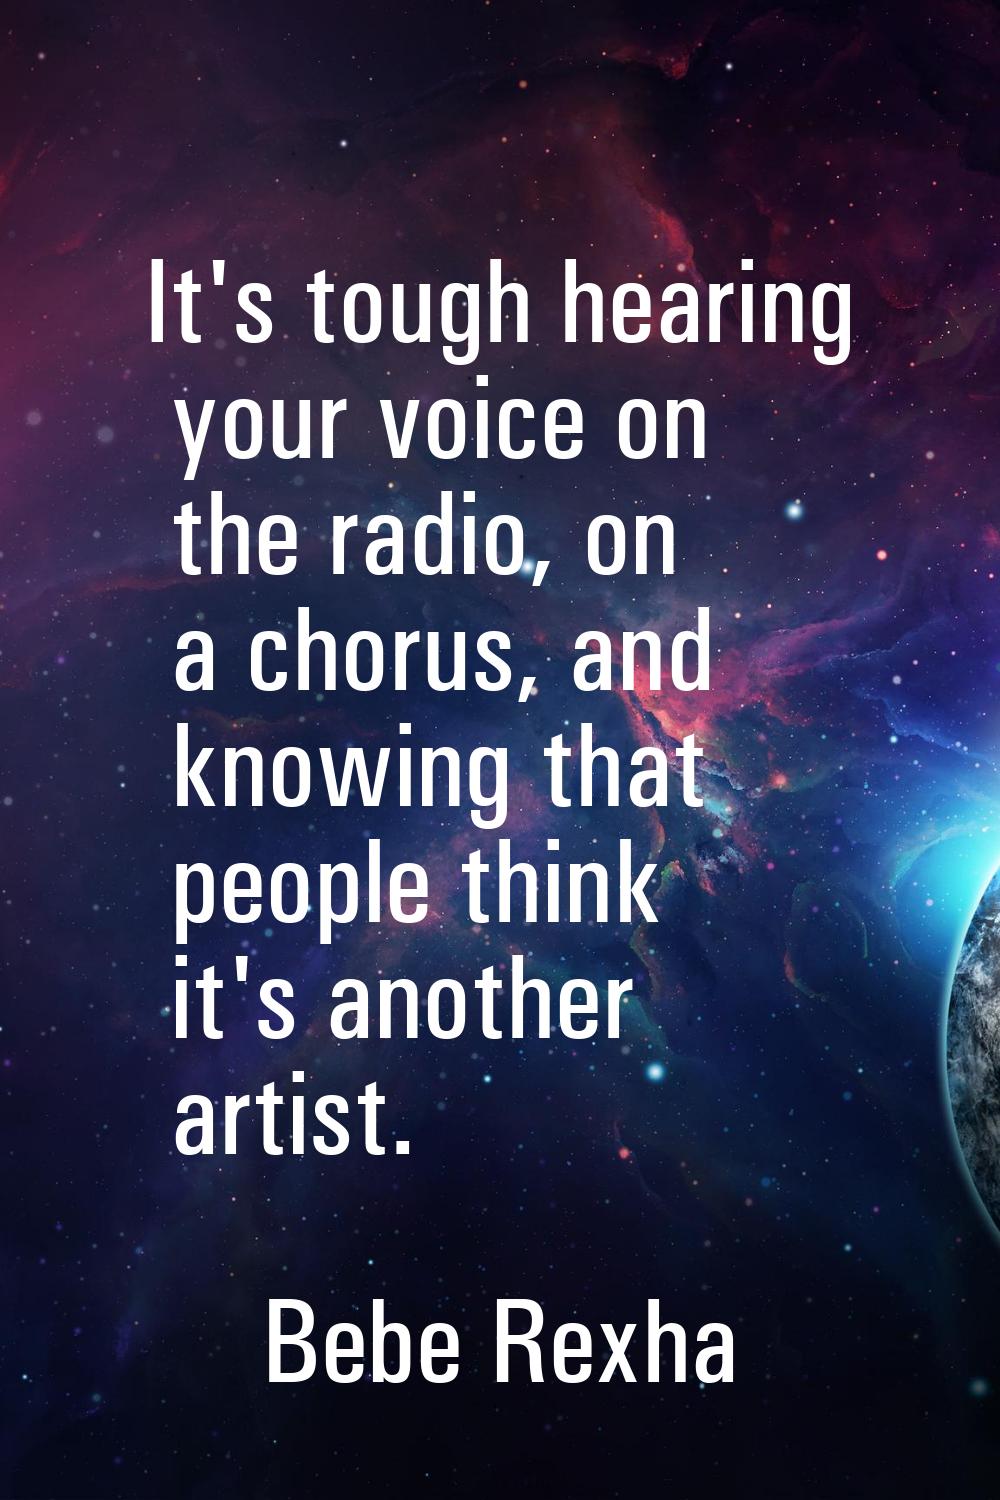 It's tough hearing your voice on the radio, on a chorus, and knowing that people think it's another